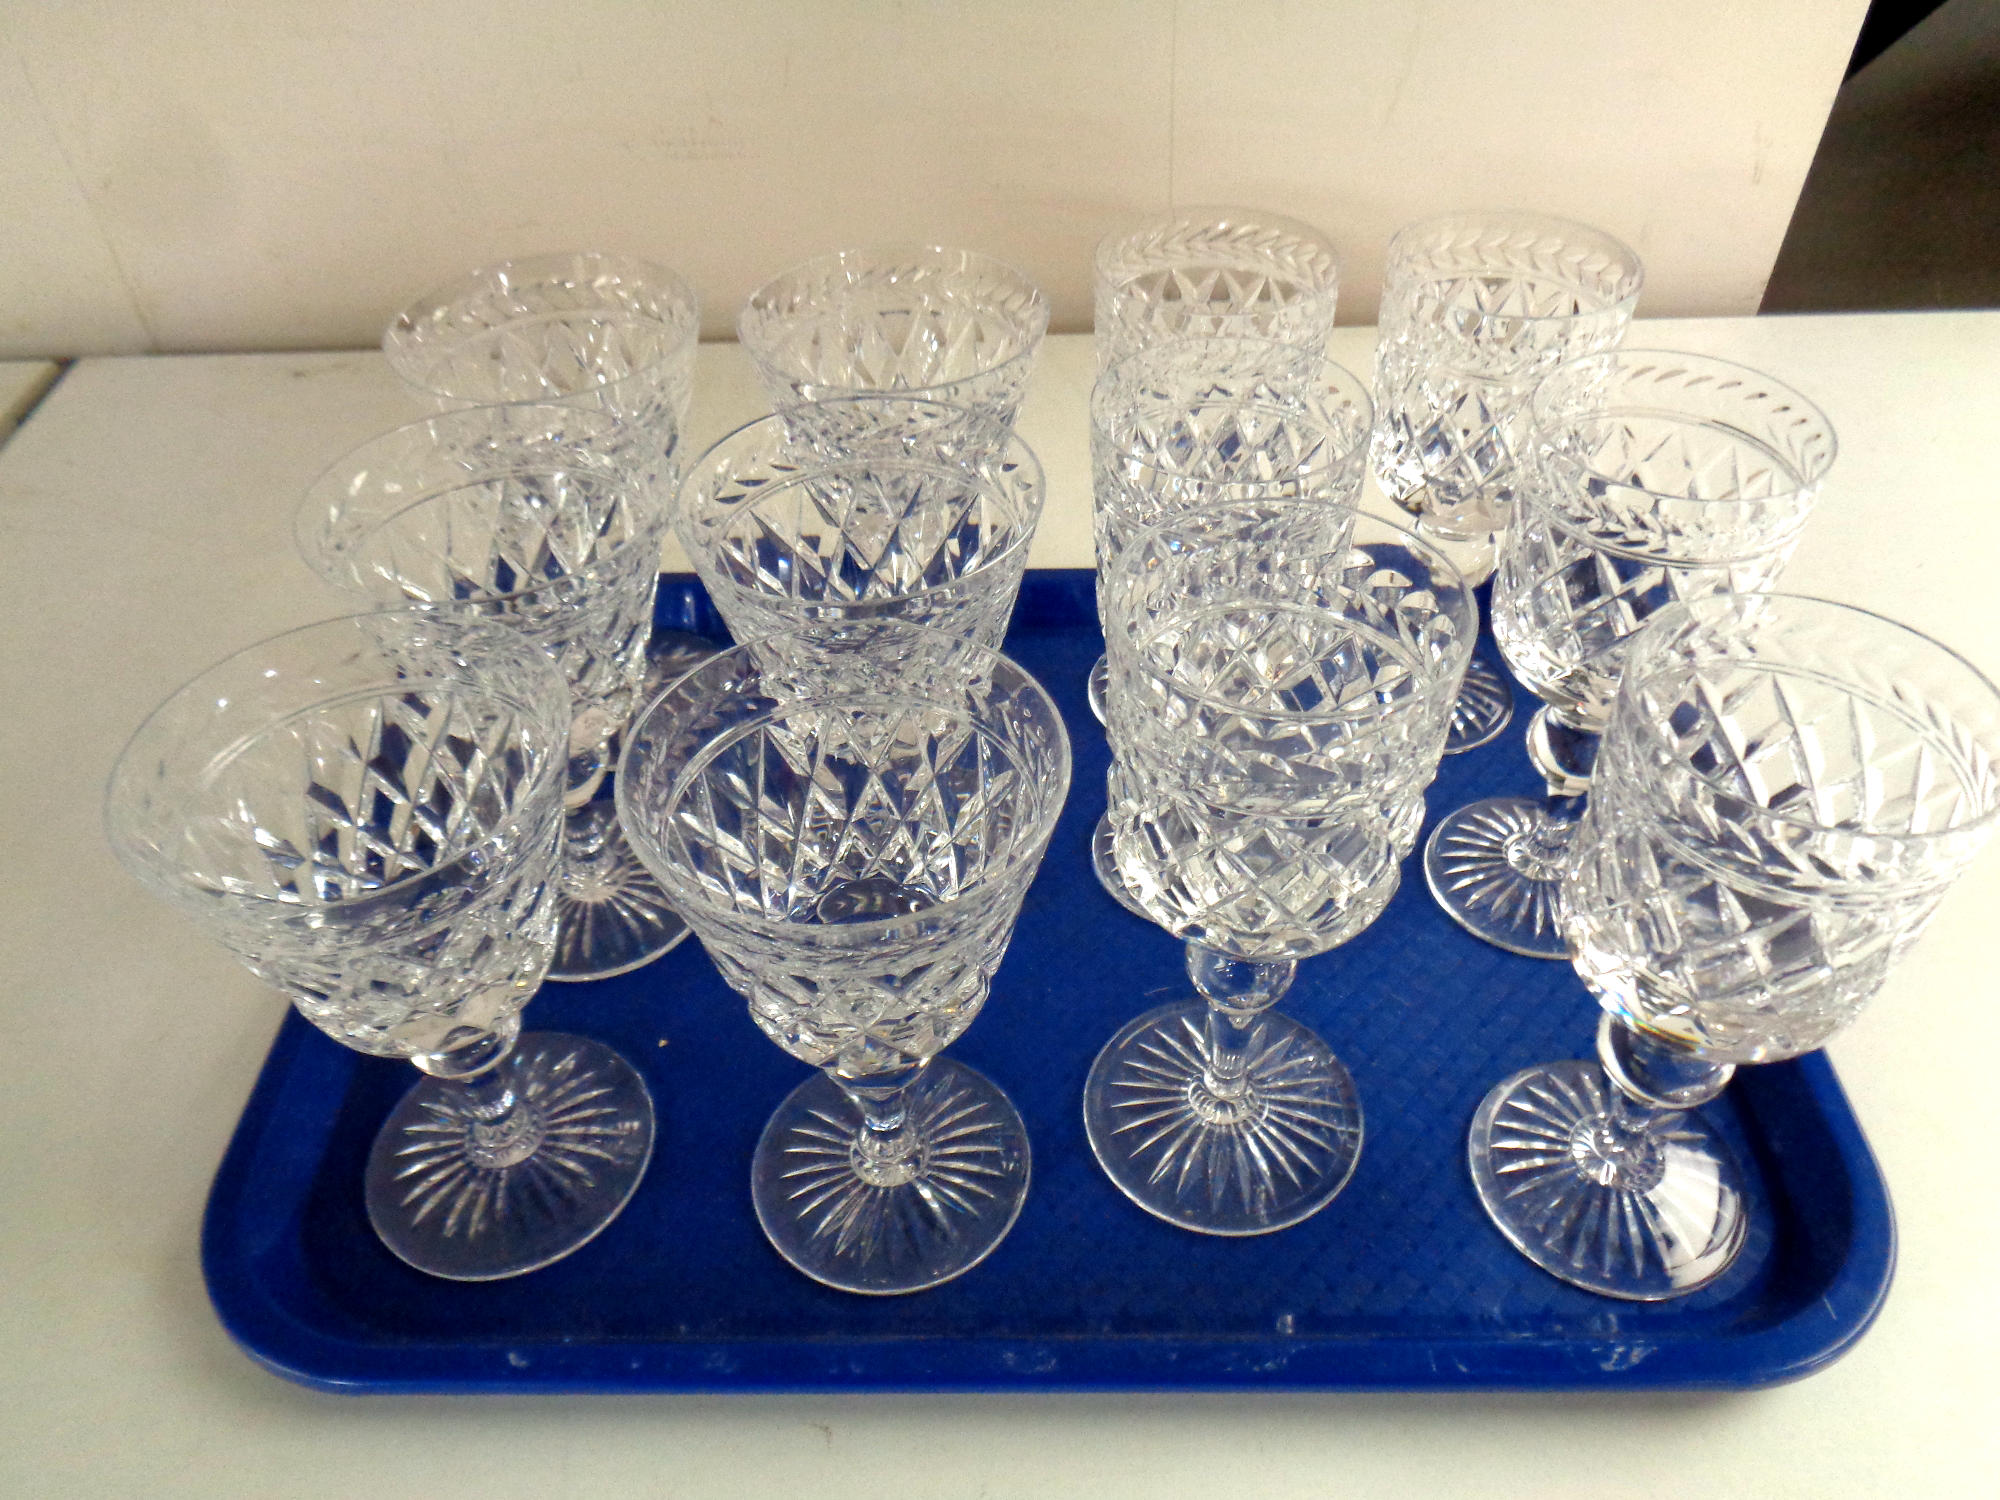 A tray containing two sets of six good quality lead crystal wine glasses